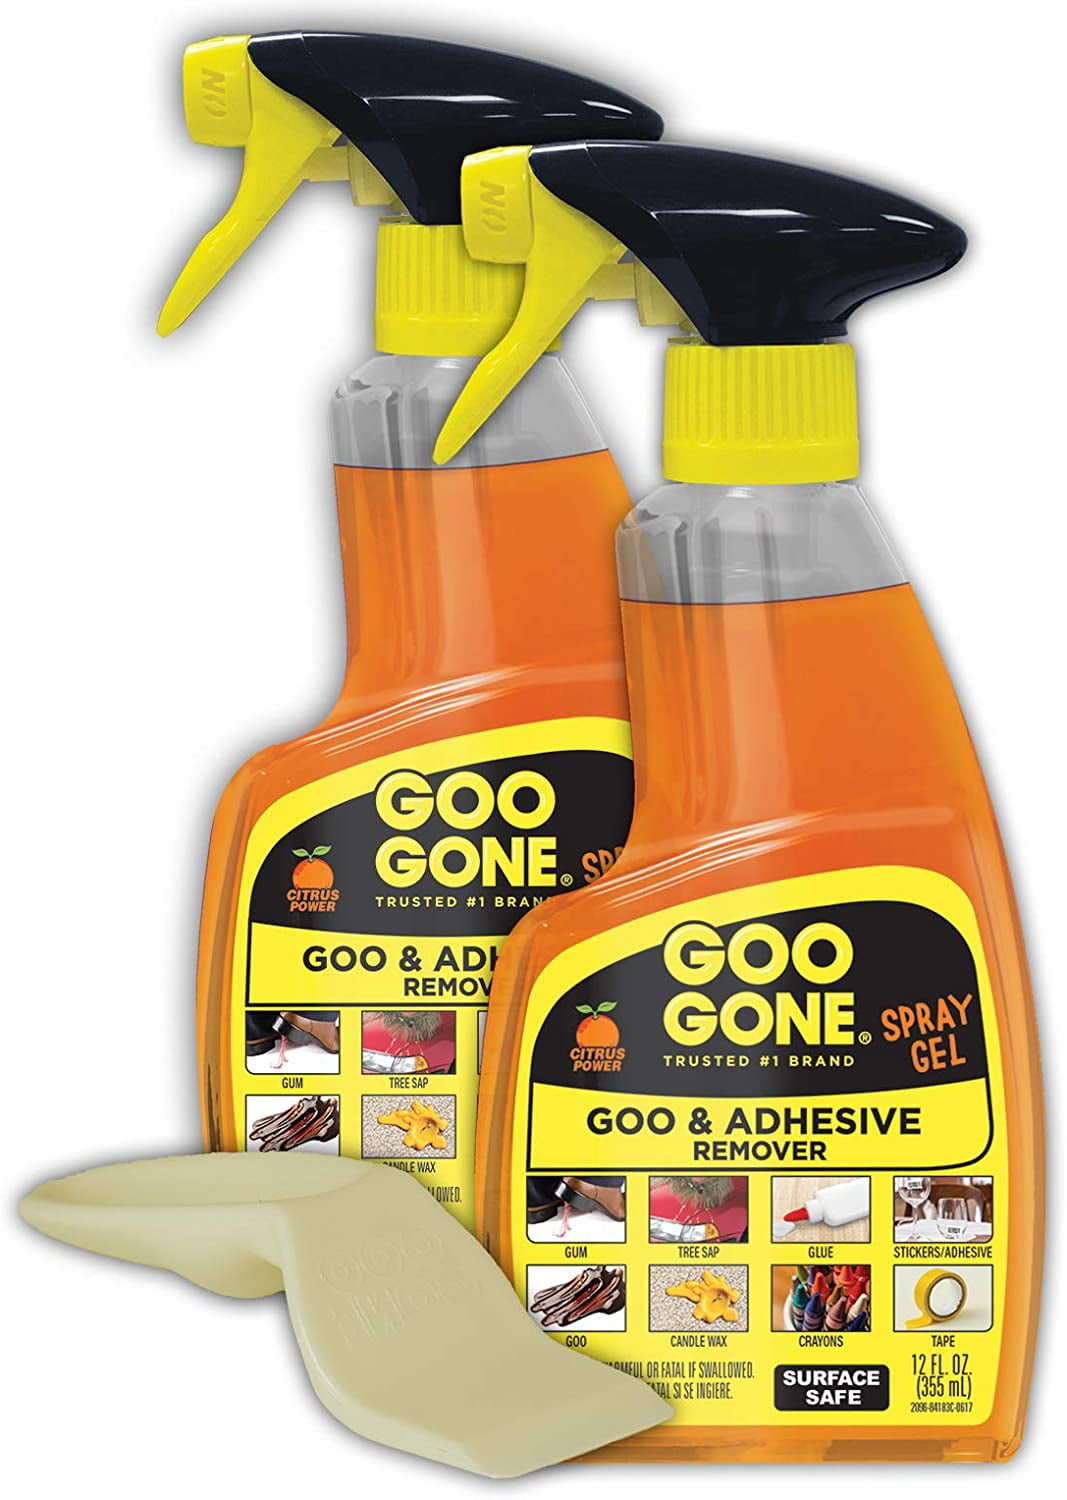 Goo Gone 14 Oz. Fume Free Oven & Grill Cleaner